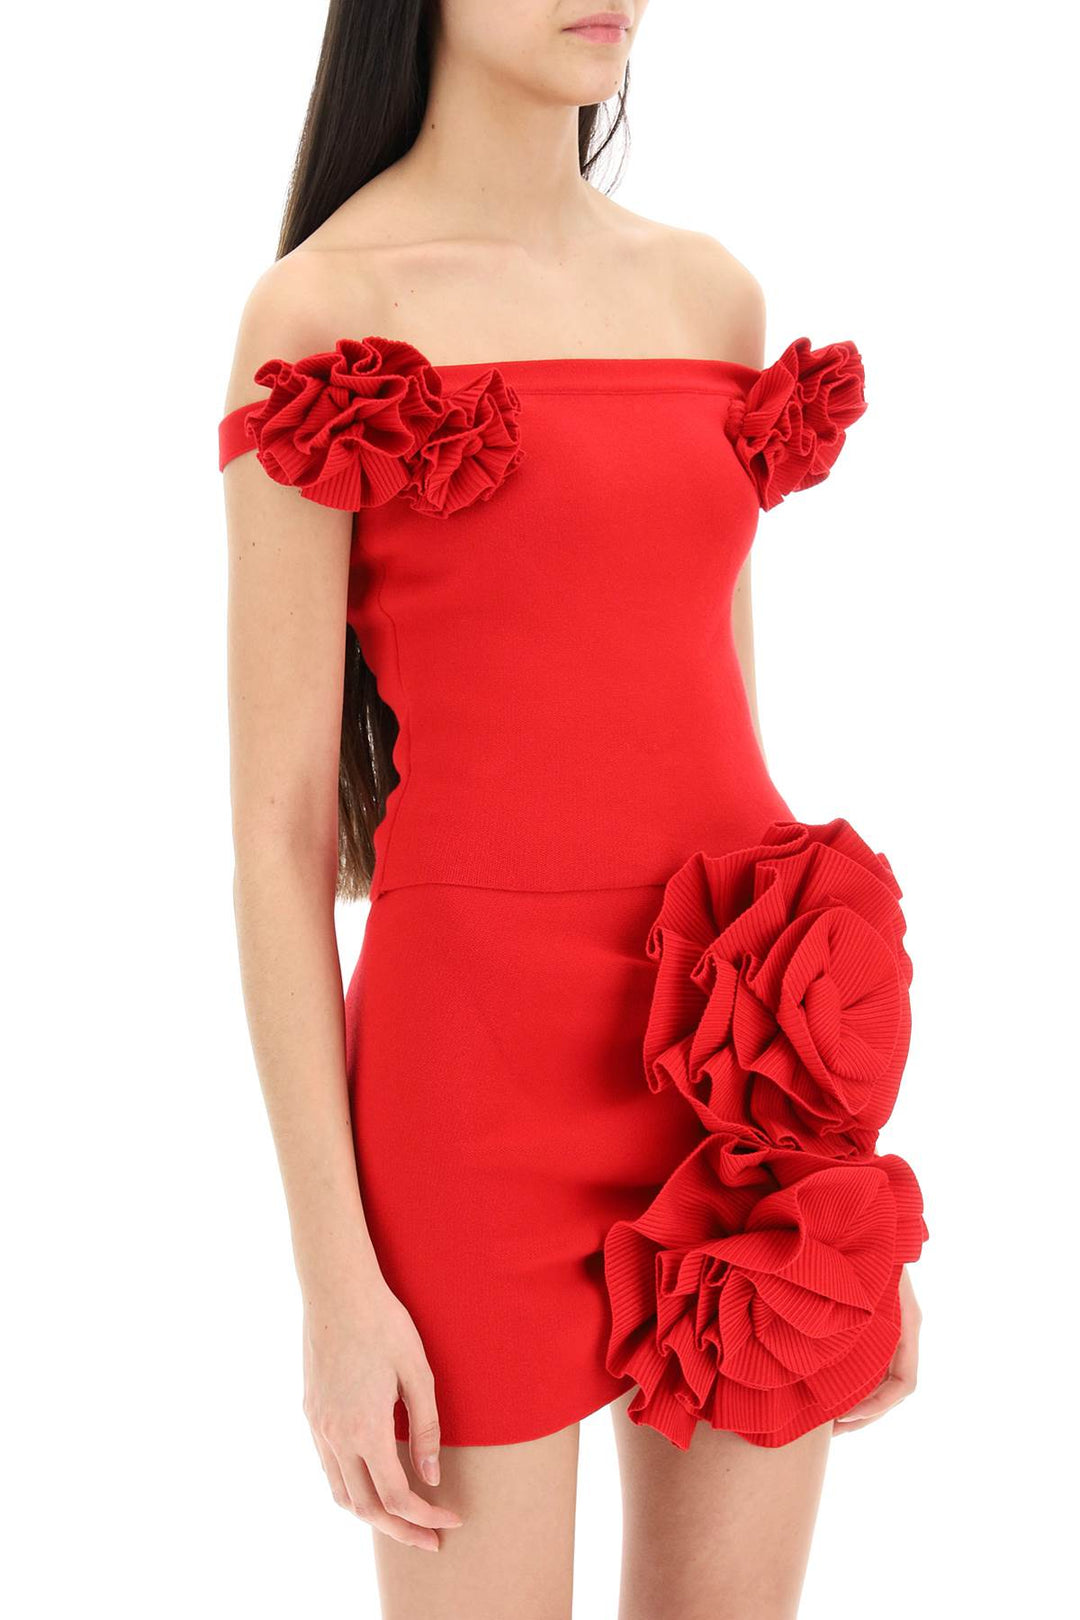 Magda Butrym Fitted Top With Roses   Rosso